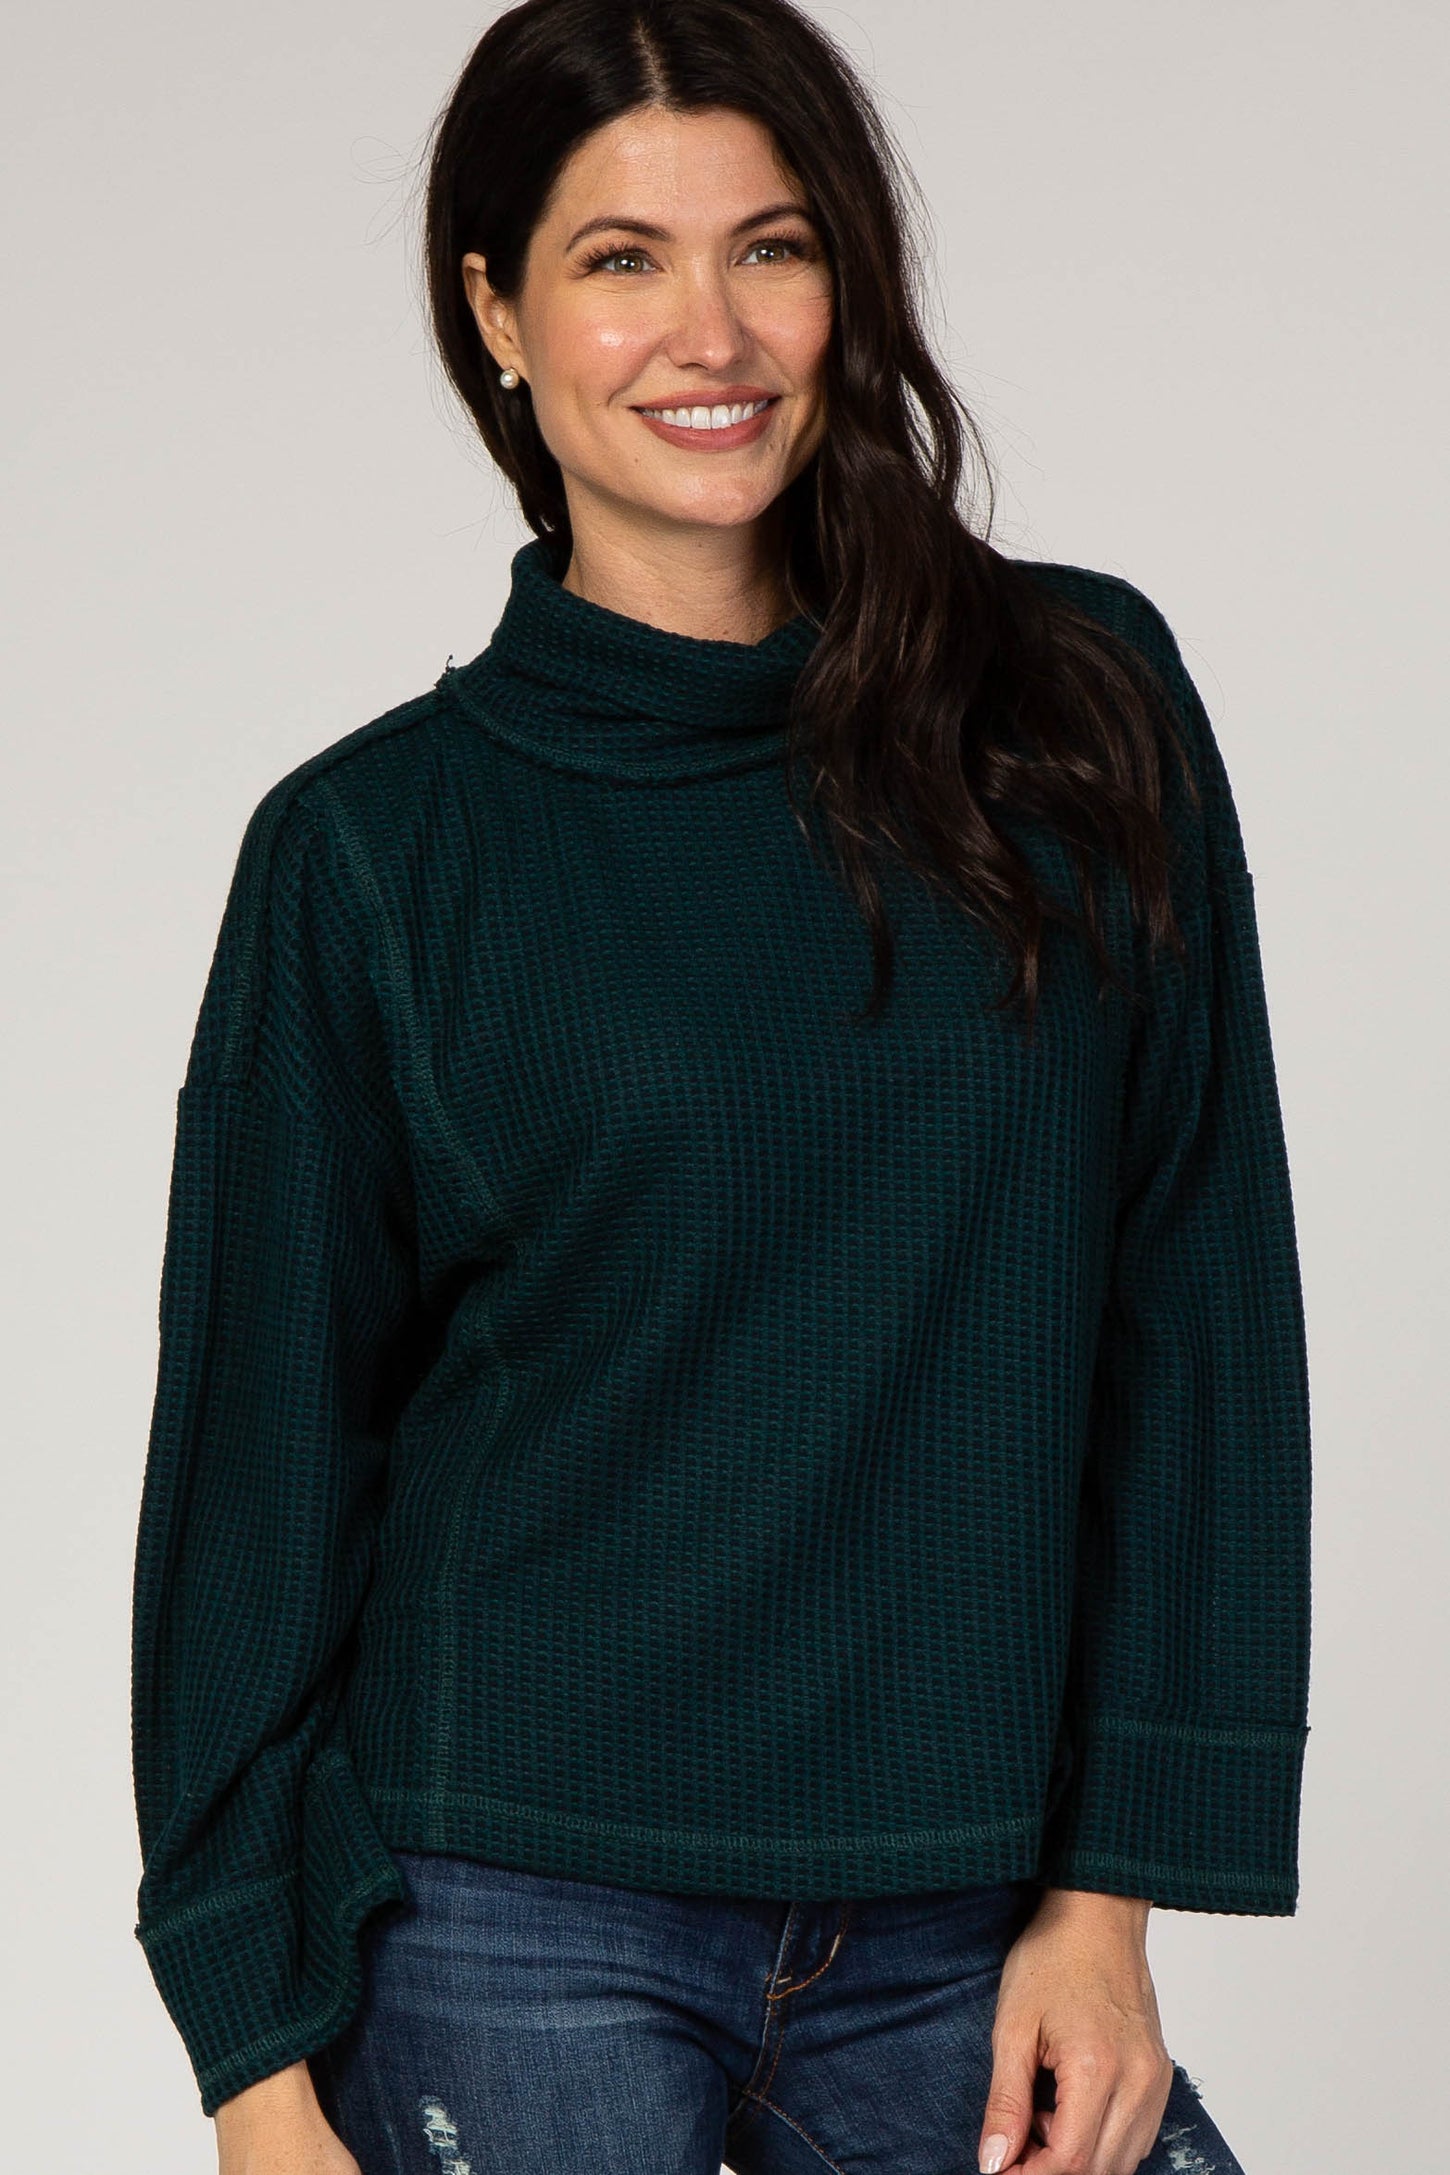 Green Long Sleeve Cowl Neck Maternity Top